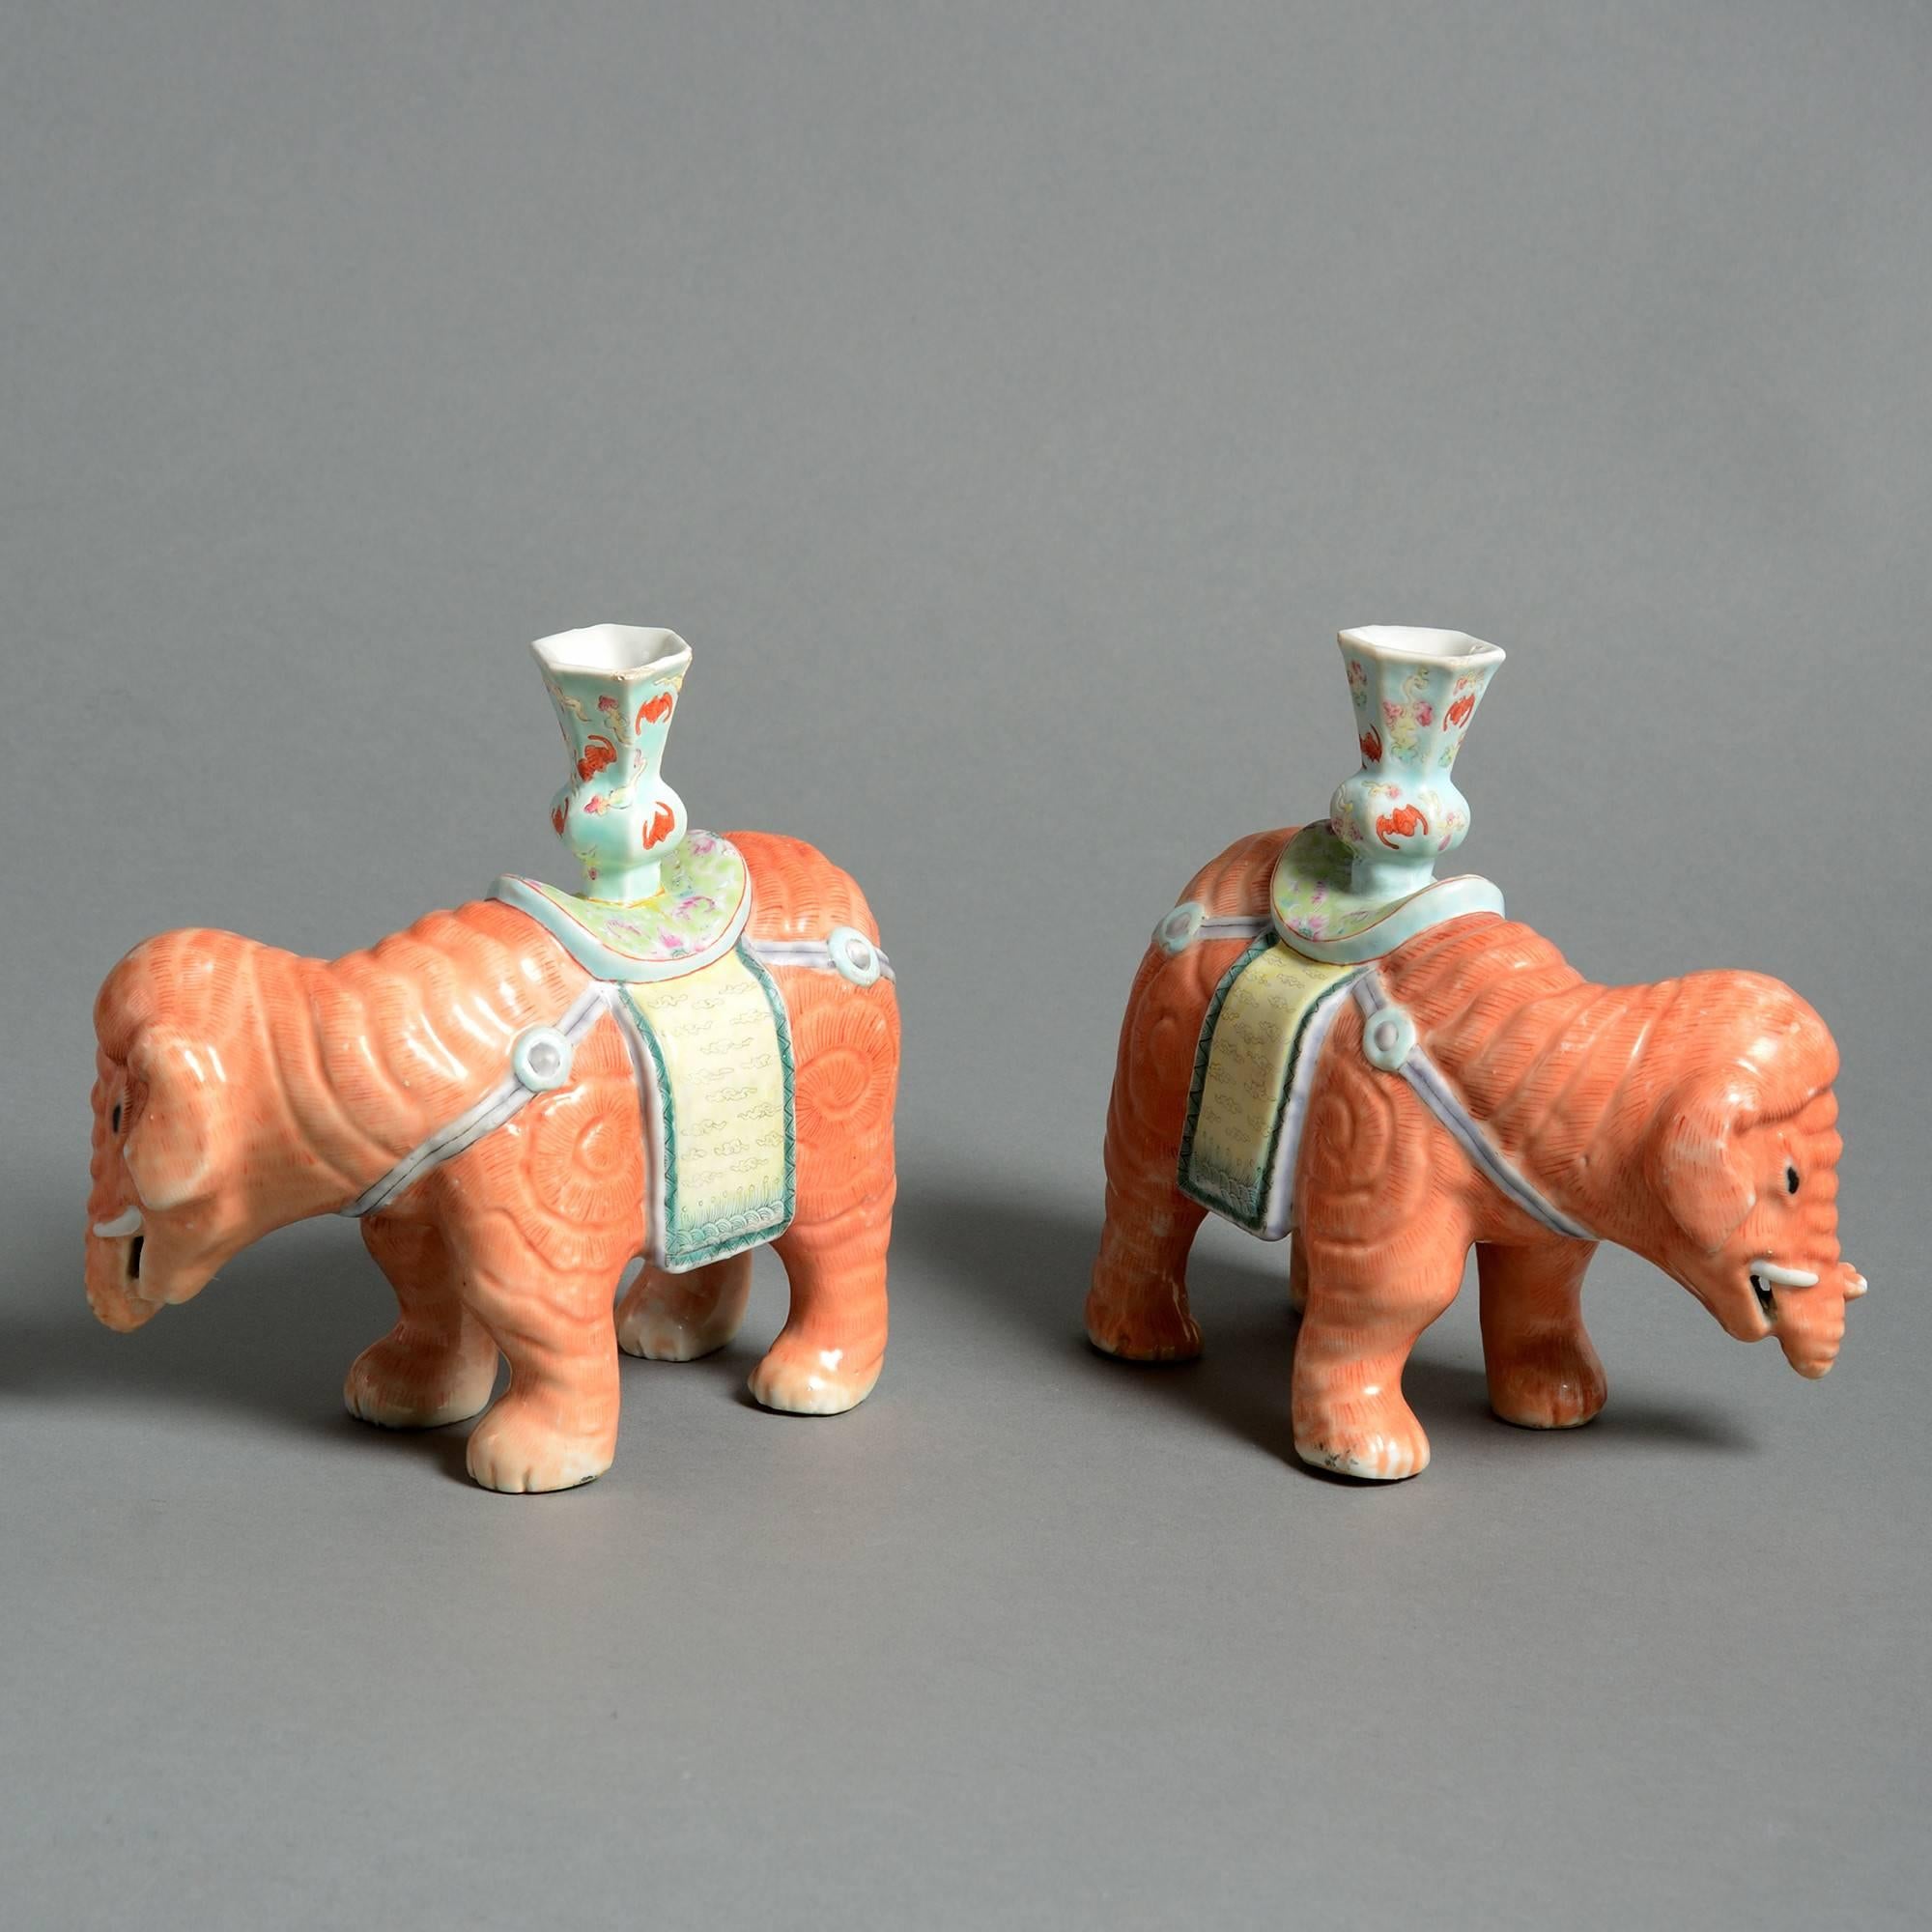 A pair of late 19th century export porcelain candle holders, modelled in the form of elephants. 

Qing dynasty, Guangxu Period (1875-1908).
    